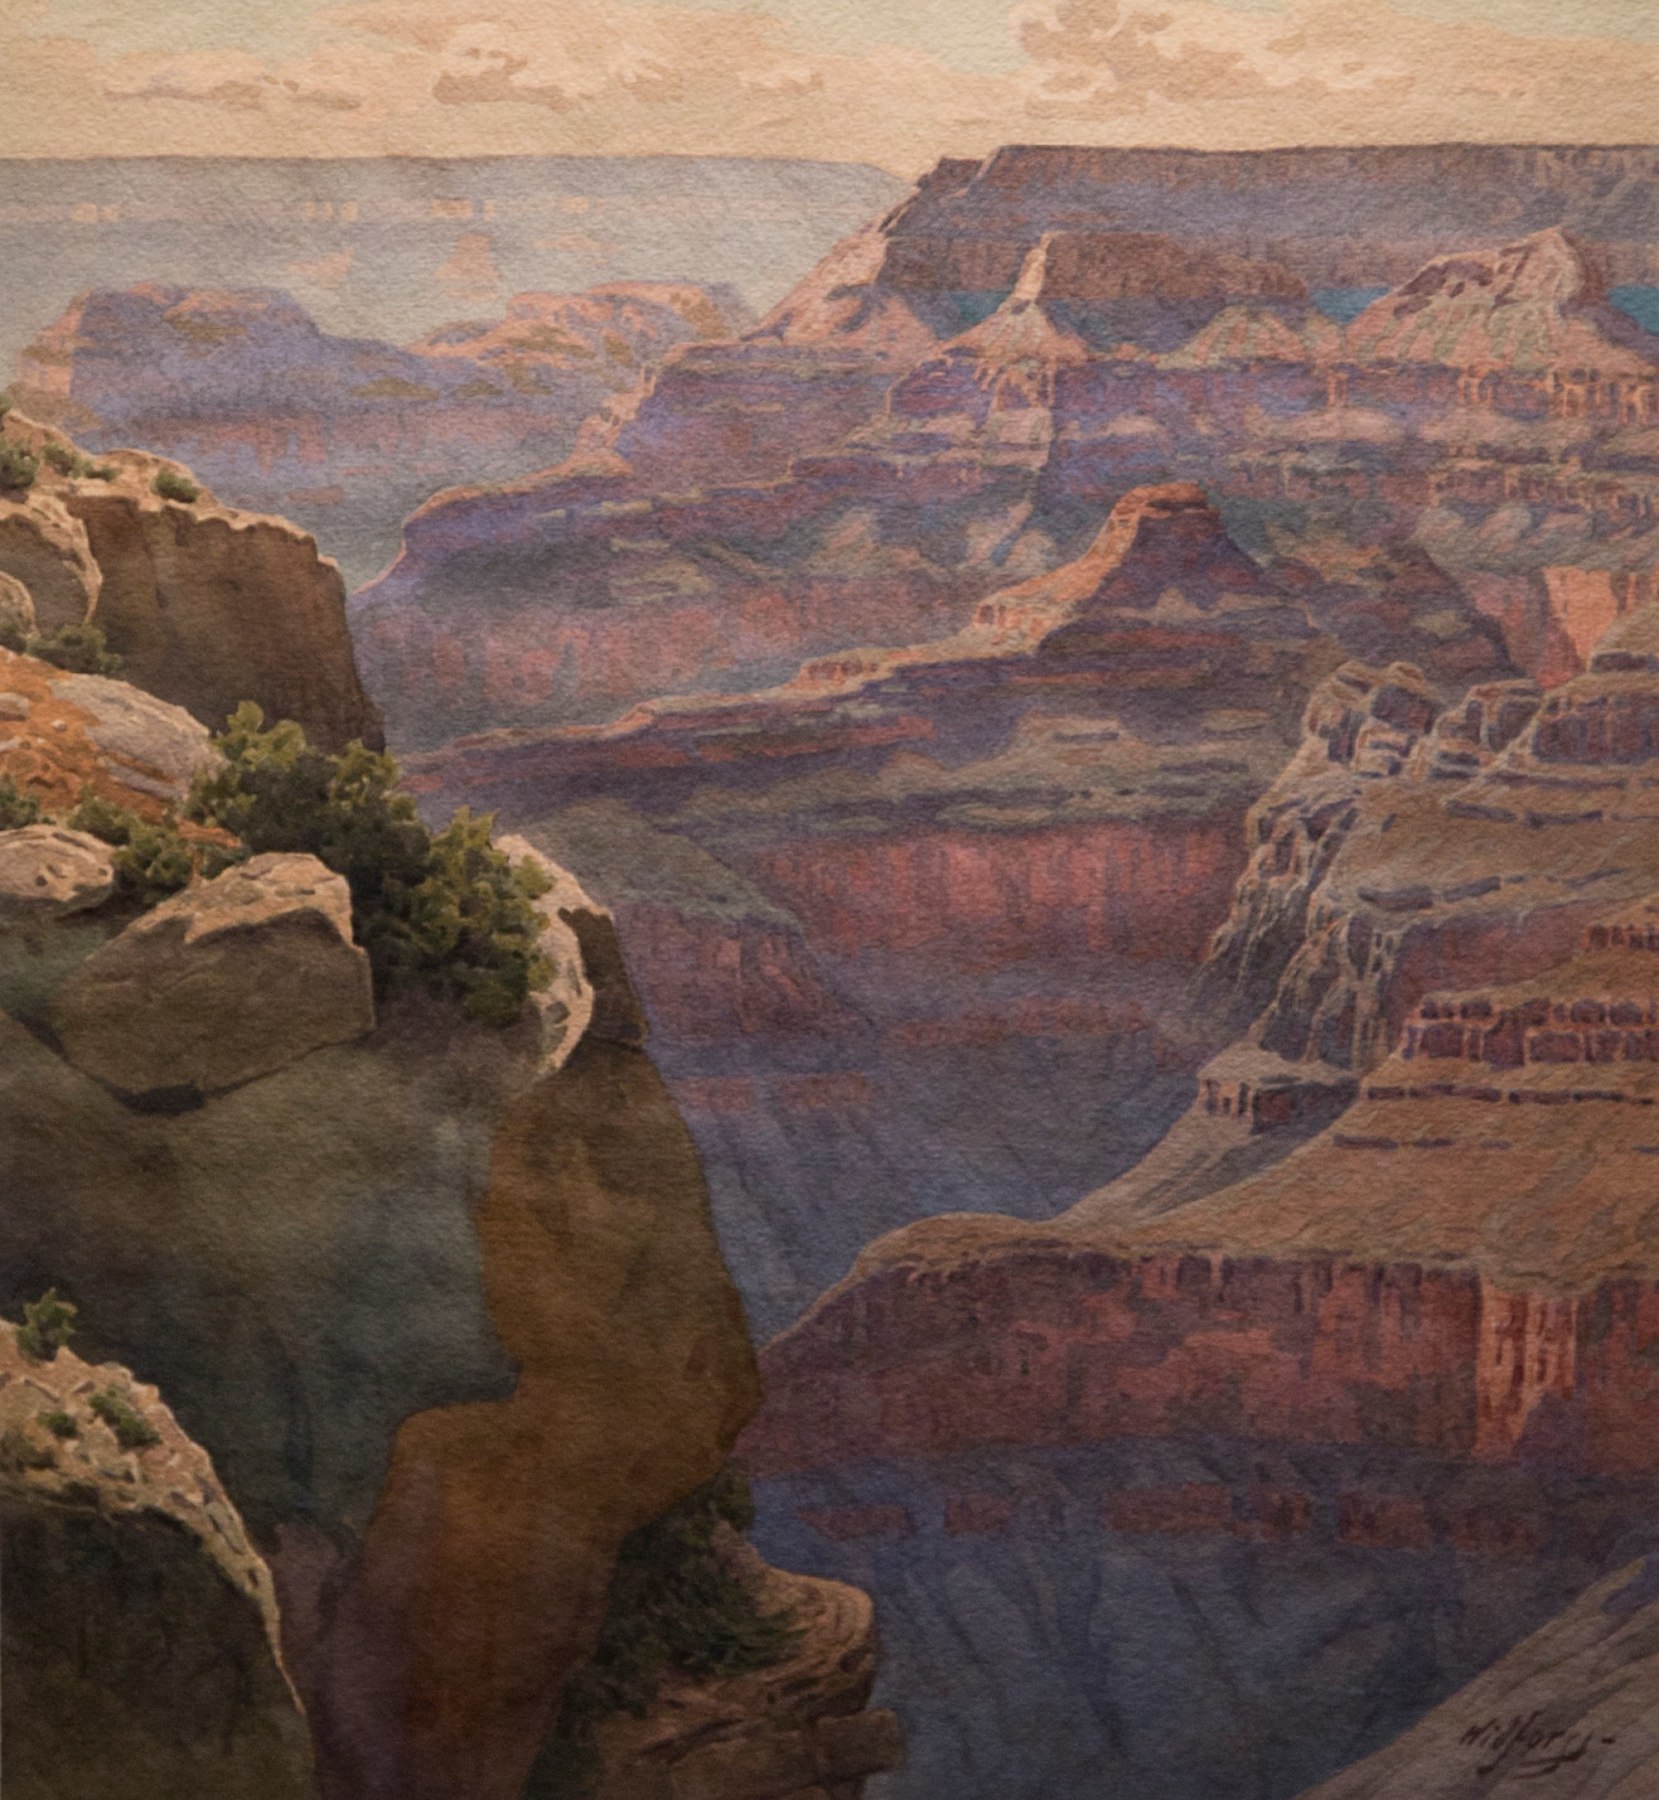 Gunnar Widforss, View of Hopi Point on the west rim of the Grand Canyon, Grand Canyon National Park, Western art, watercolor